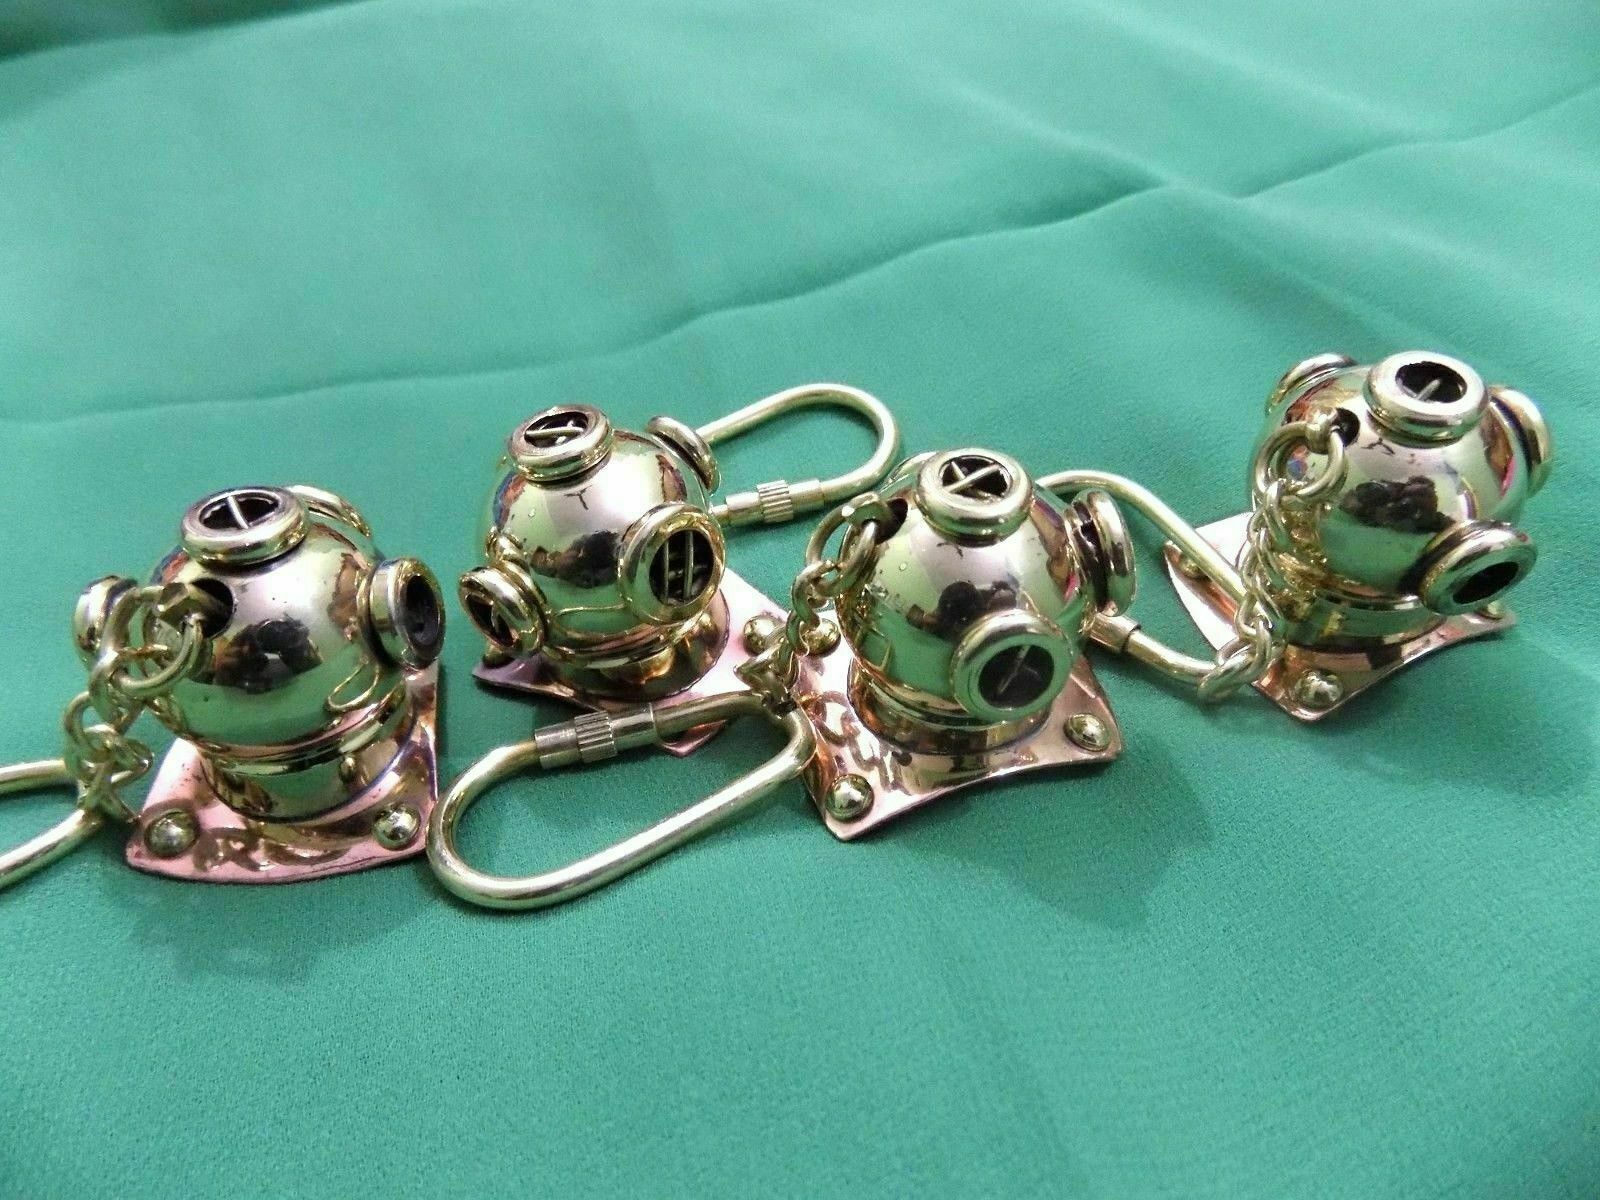 Lot of 4 New Solid Brass Divers Helmet Keychain Nautical Maritime Diving Gifts  Без бренда